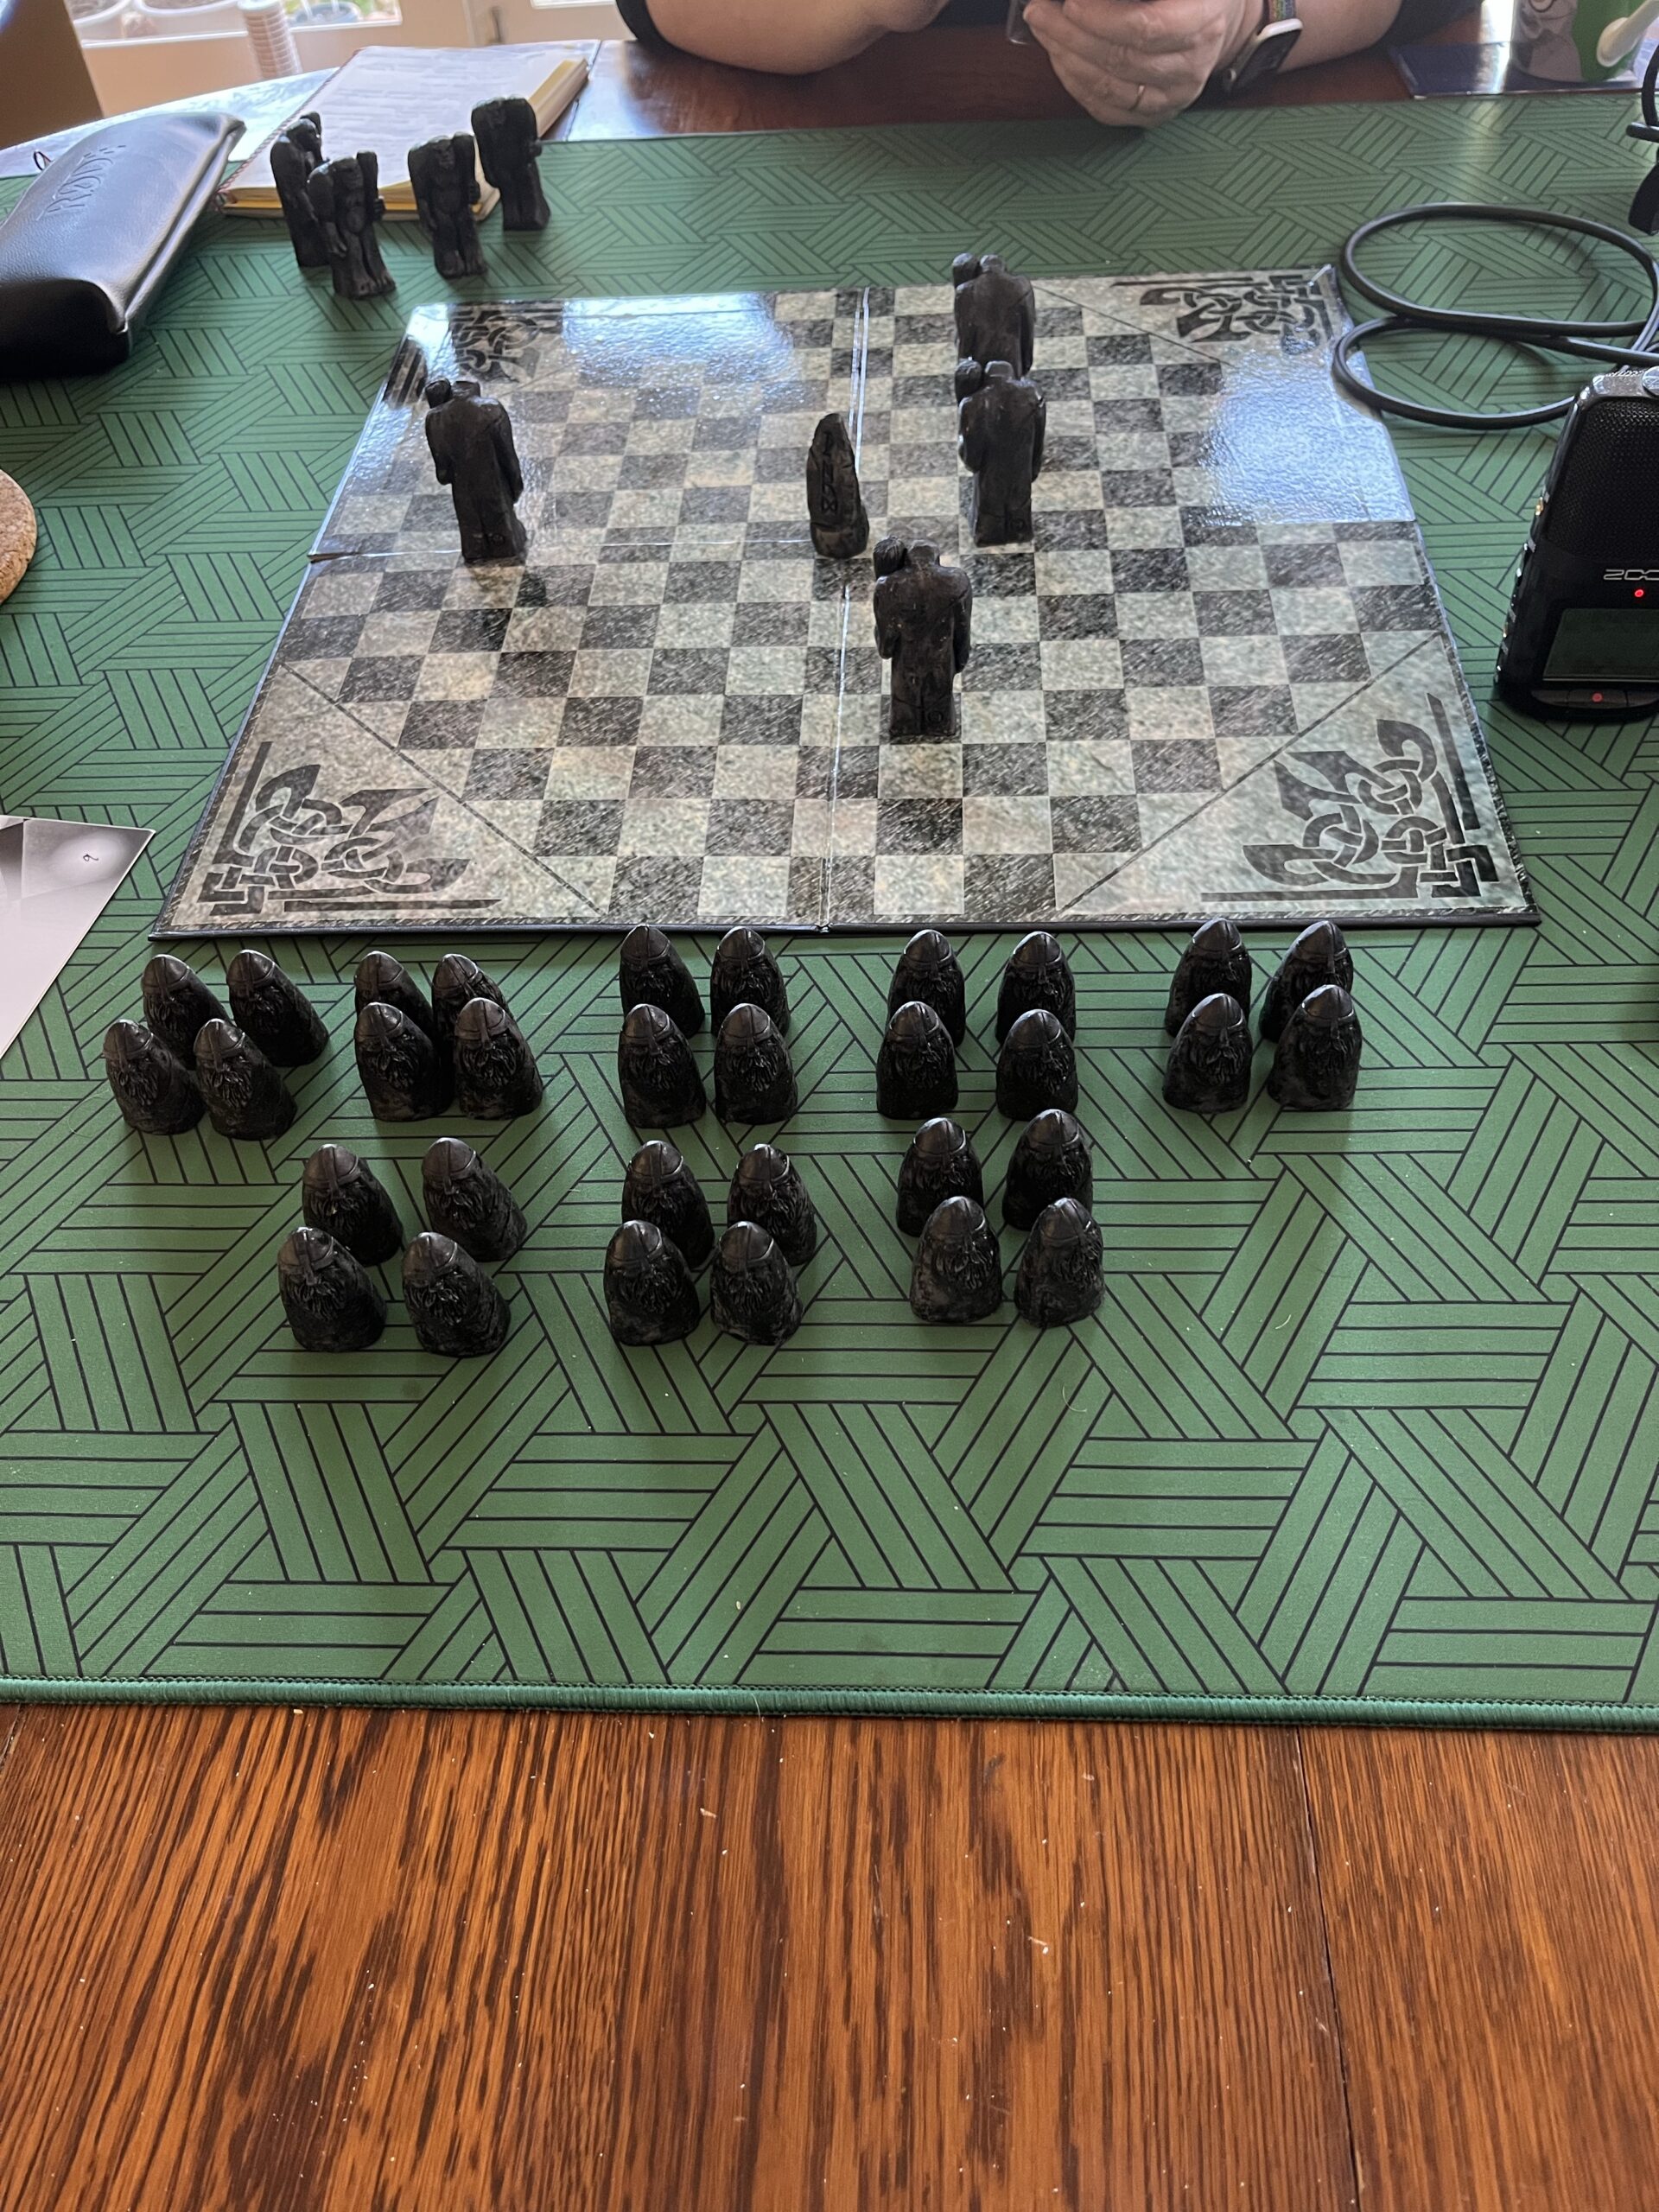 A square board with an octagonal arrangement of black and white squares sits on a green patterned matt on a wooden table. On the board are four large, dark-coloured playing pieces, humanoid-shaped and holding clubs. There's also a pointy piece in the centre of the board. Four more of these pieces are off the board at the top, while 32 smaller pieces with points are clustered in groups of four off the board at the bottom, near the camera.